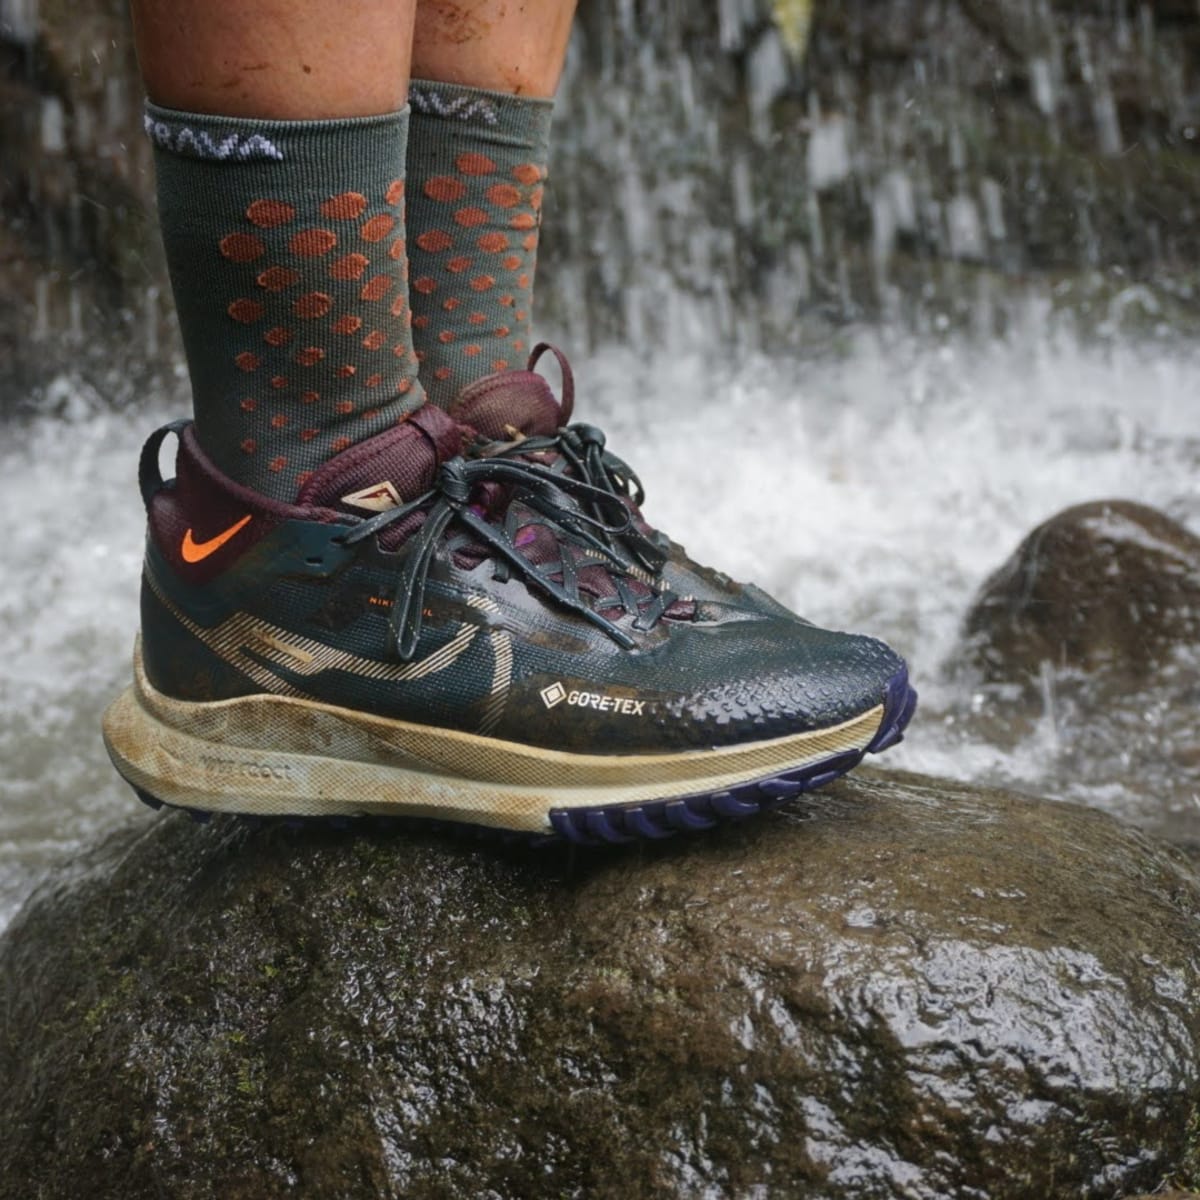 The Nike Pegasus Trail 4 Gore-Tex Can Handle Anything Outside Of A  Waterfall - Men's Journal